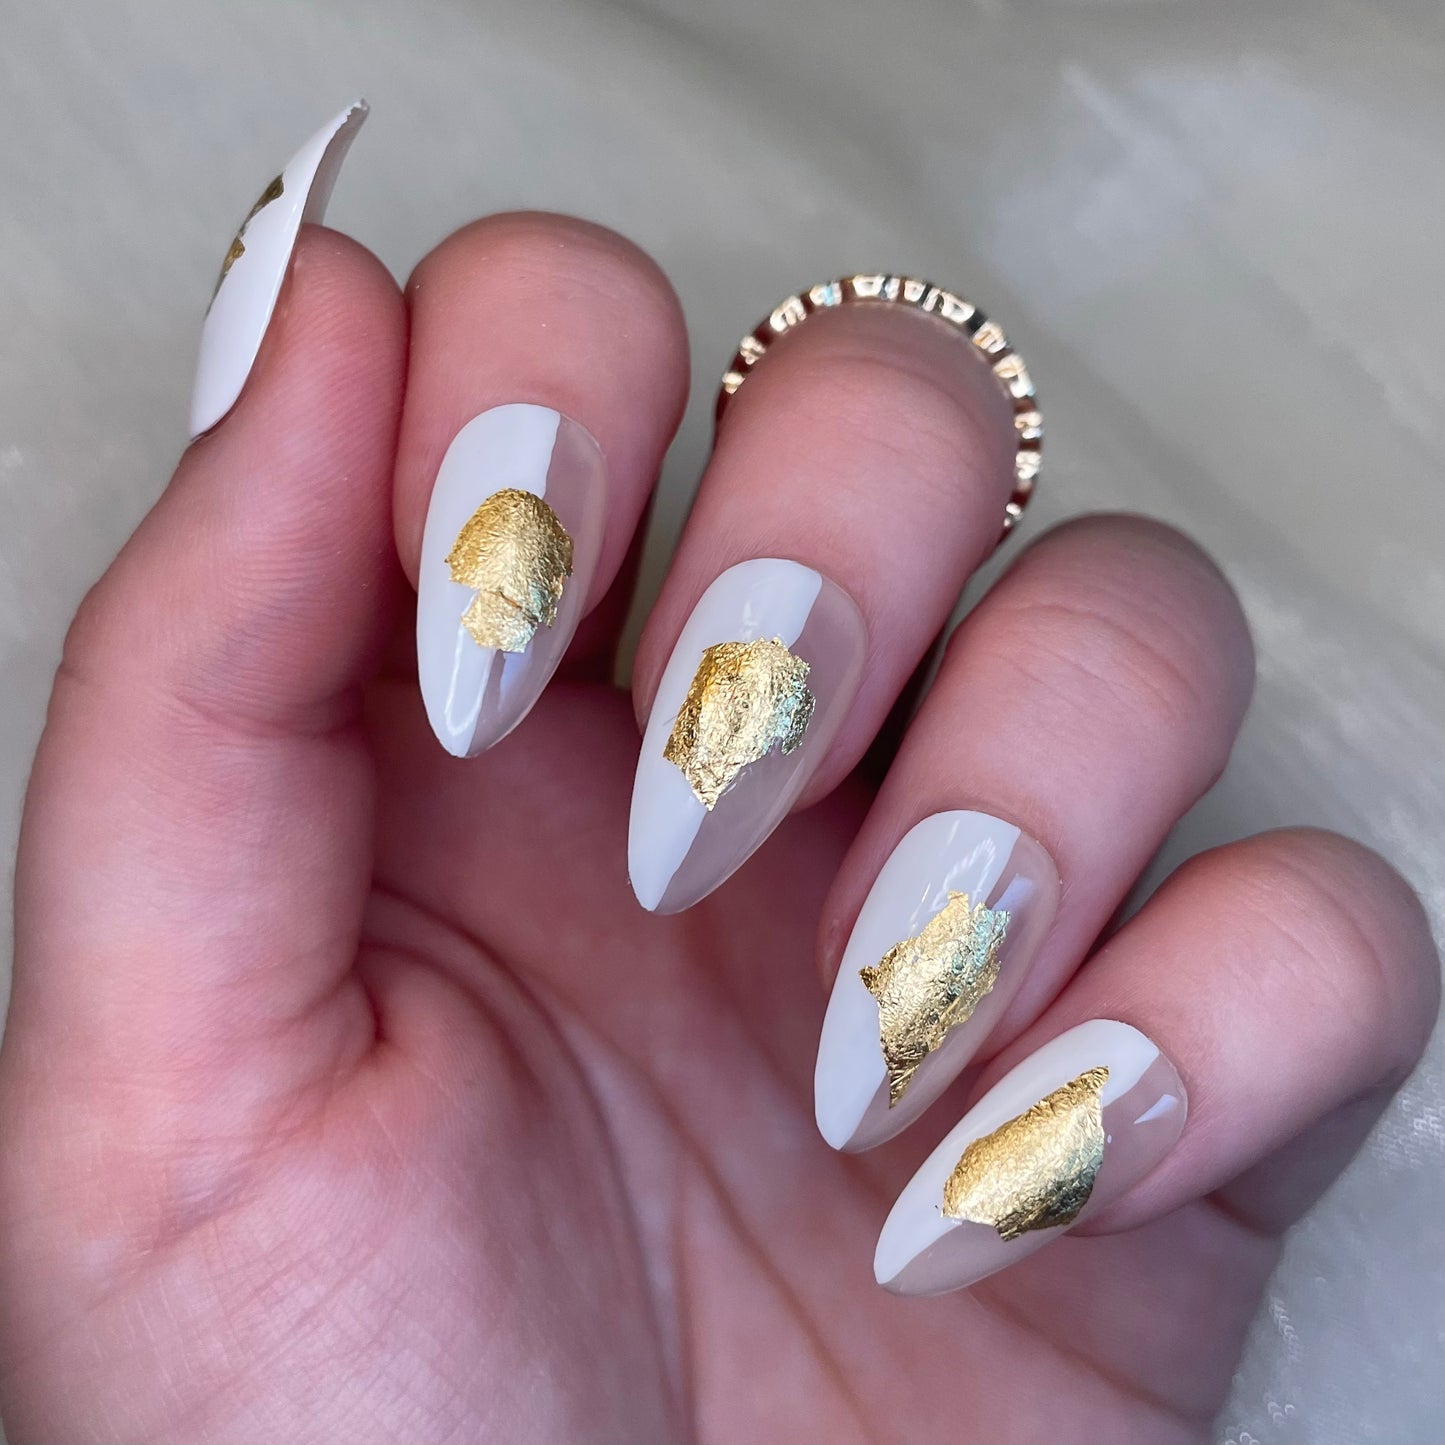 White and Sheer Nude Almond Nails with Gold Leaf Design